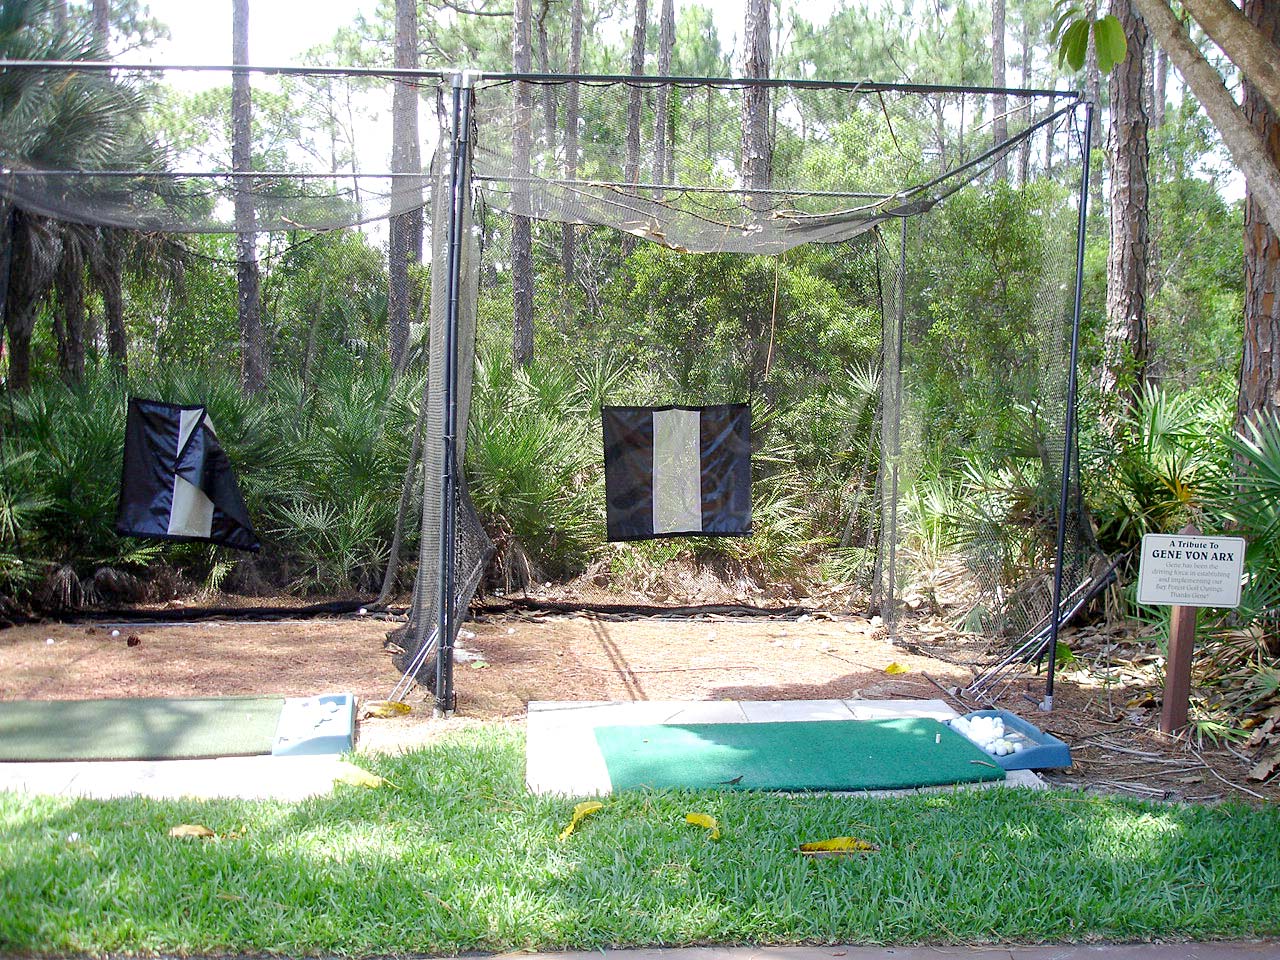 BAY FOREST Golf Nets